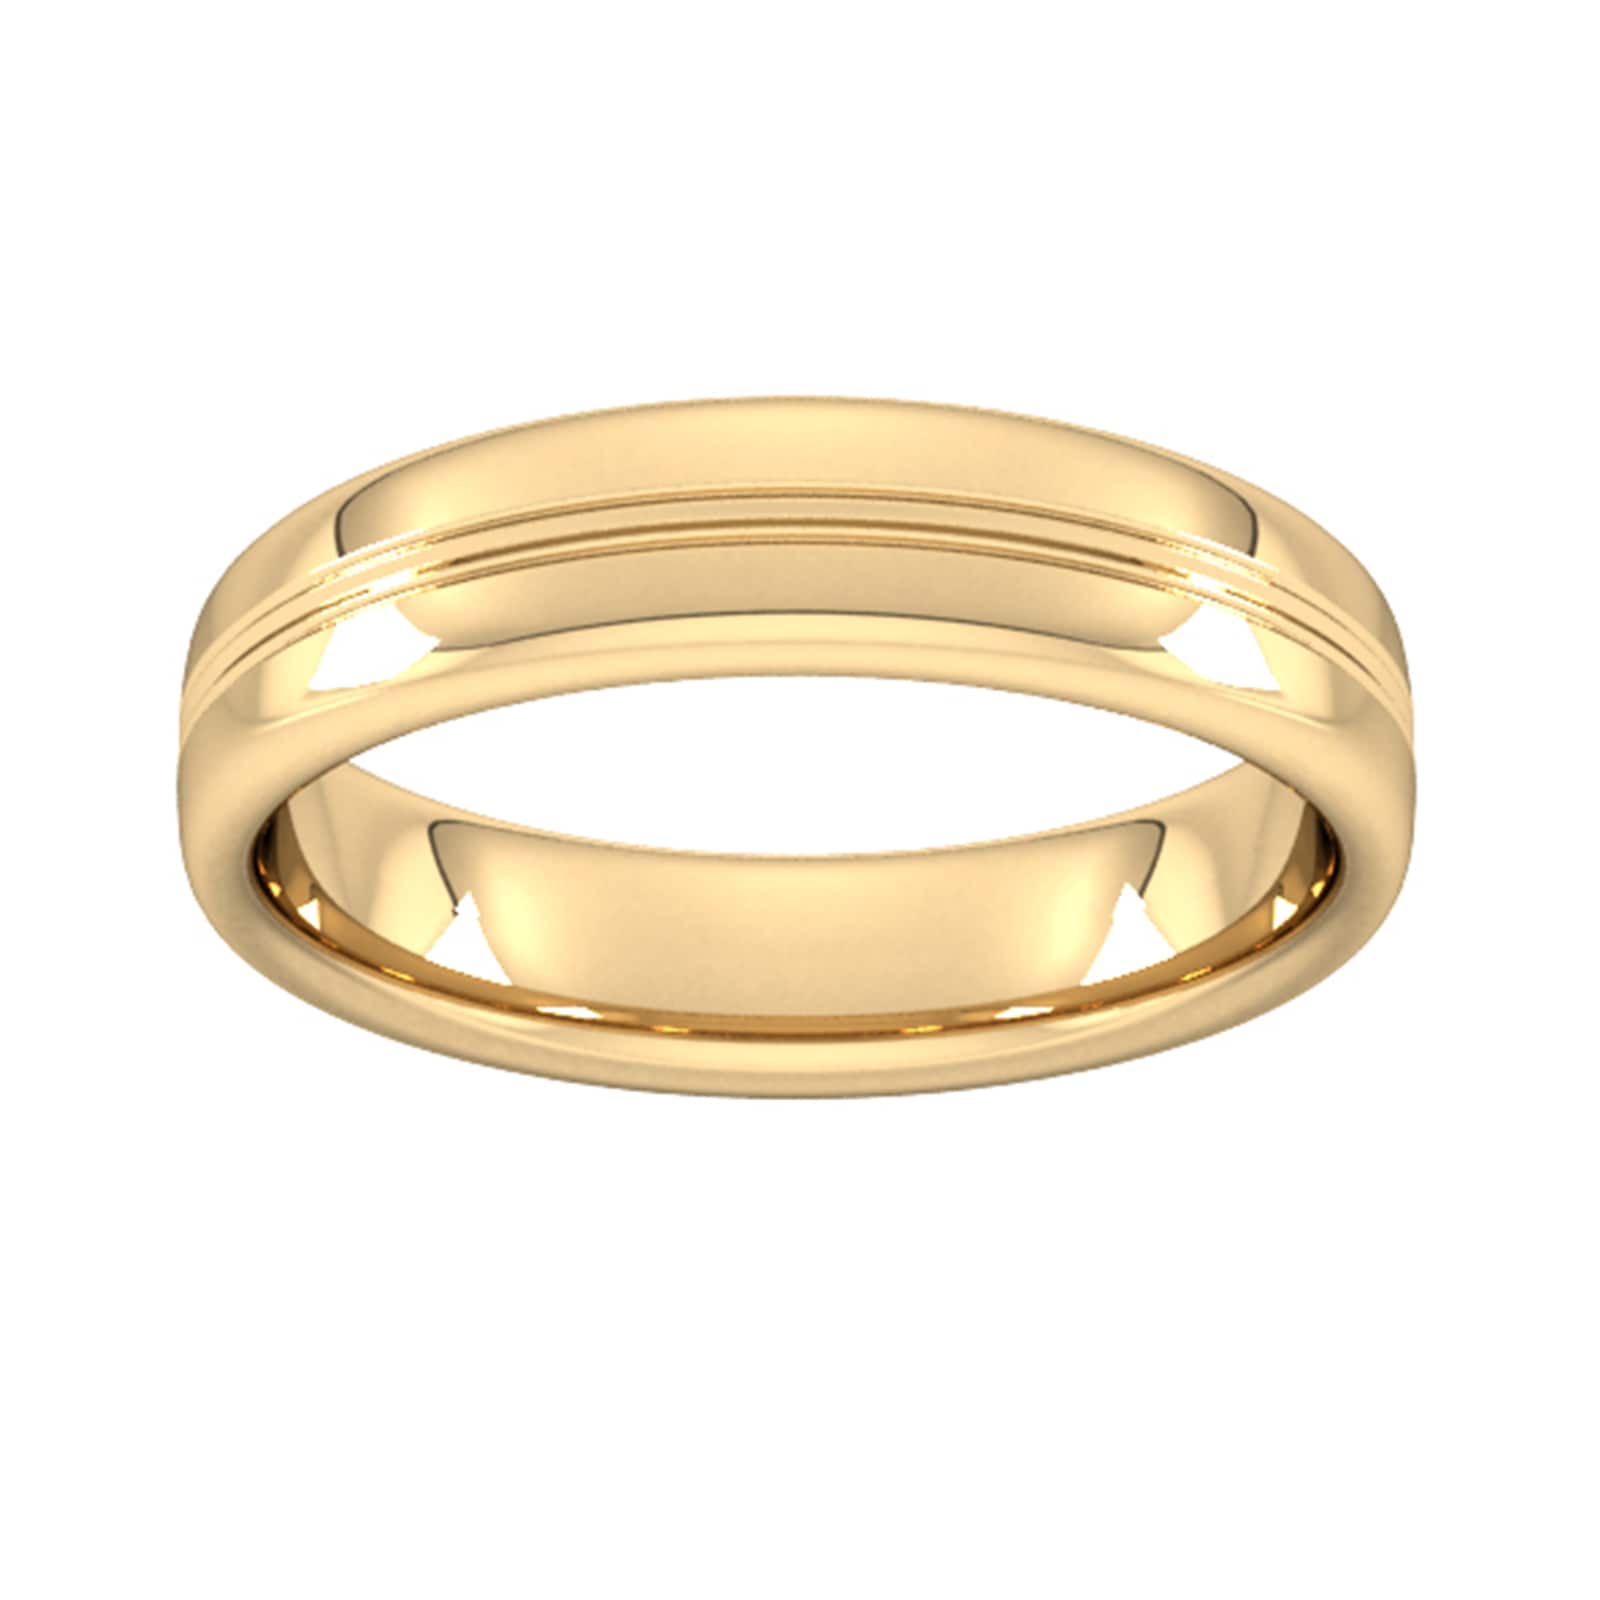 5mm Slight Court Extra Heavy Grooved Polished Finish Wedding Ring In 9 Carat Yellow Gold - Ring Size N